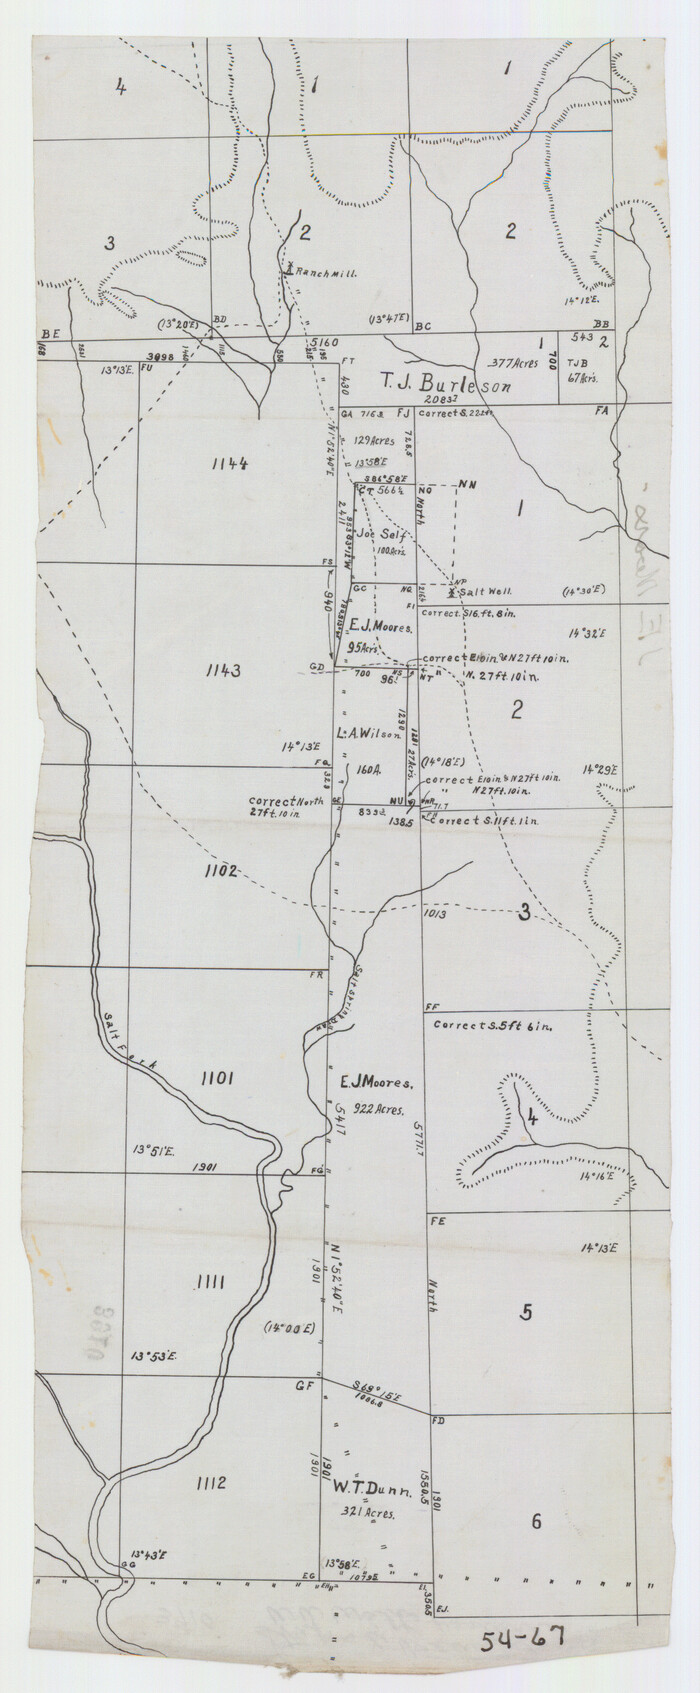 90502, [South Center of County near surveys 1144 and 1143], Twichell Survey Records